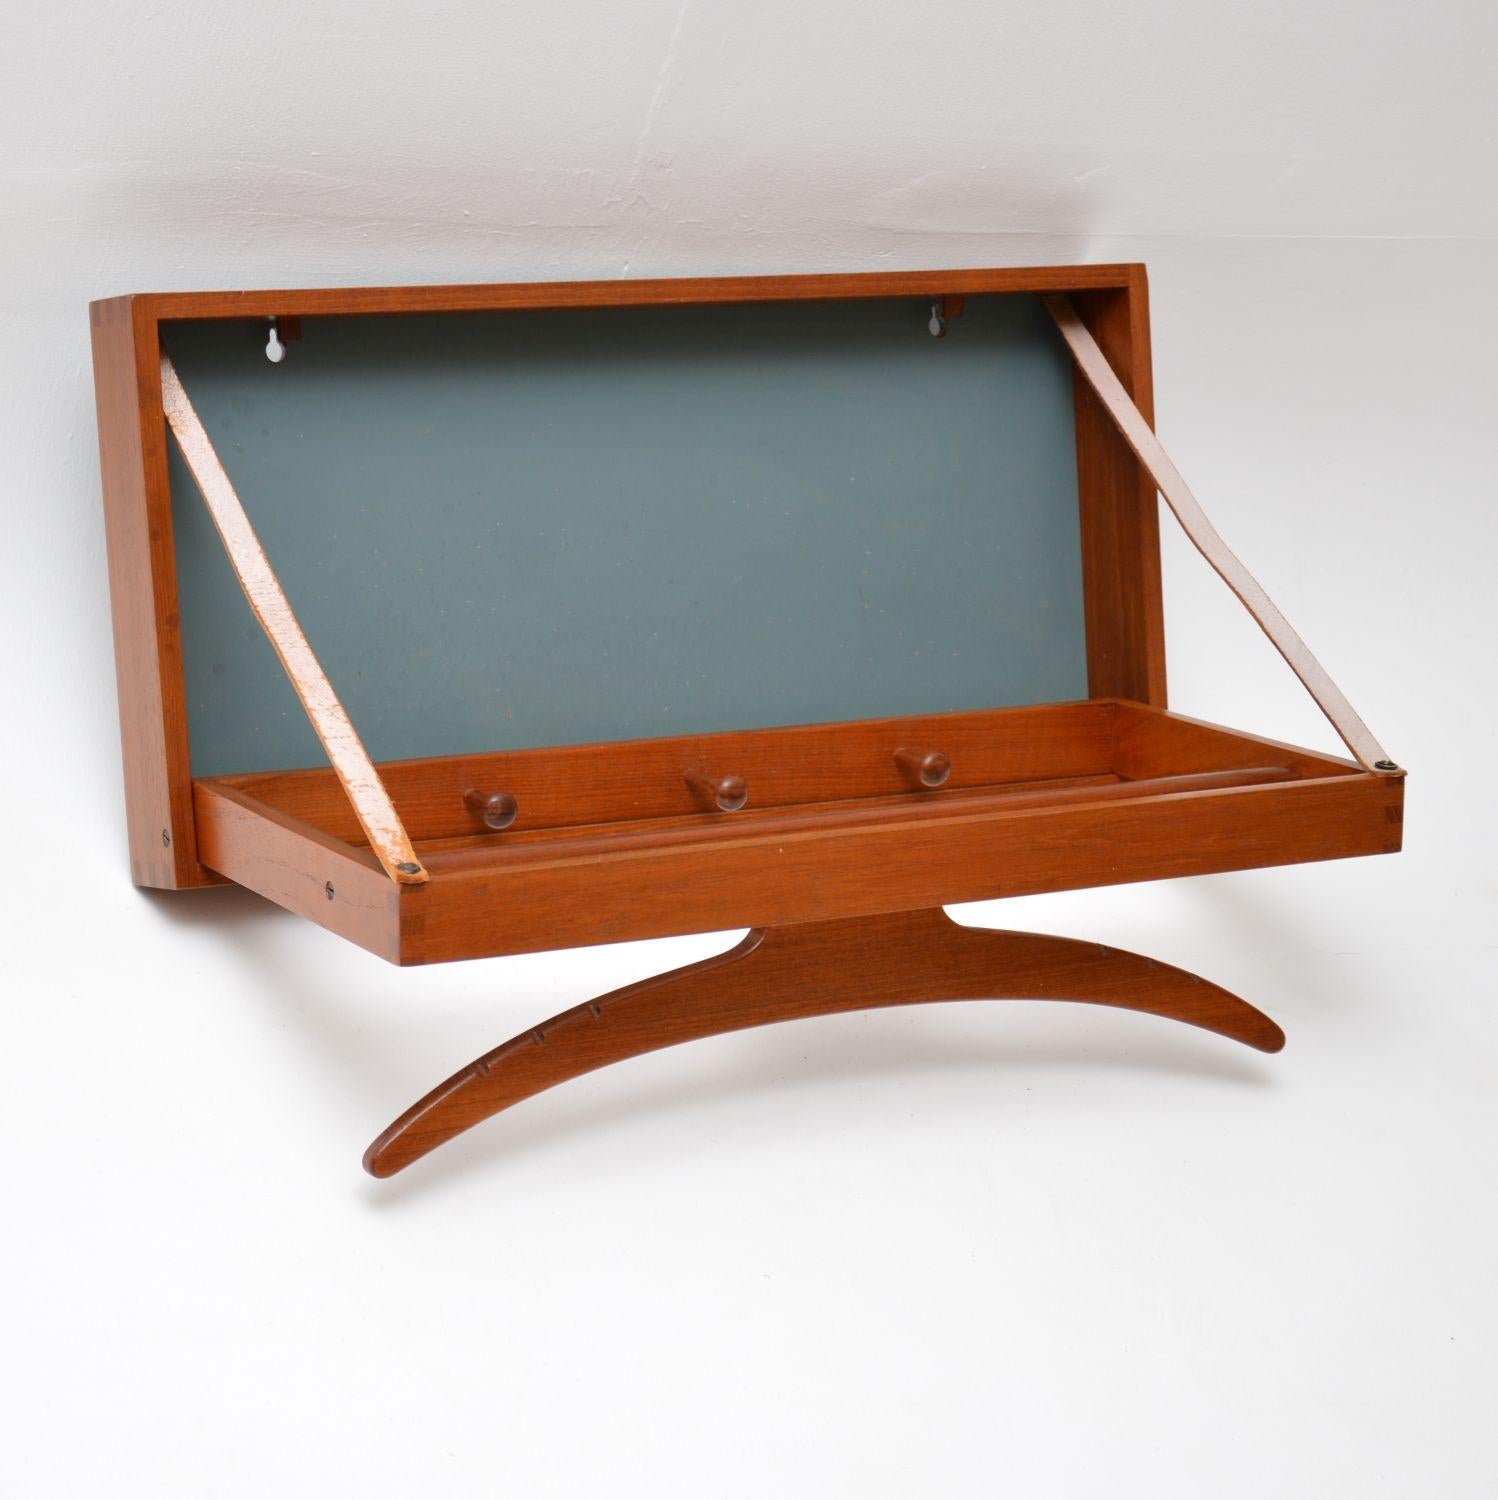 A very cool and rare item, this is a wall mounting clothes valet in teak, it was made in Denmark, circa 1960s-1970s. The design is by Adam Hoff and Poul Ostergaard, and it's a fabulous design. This easily mounts flush to a wall on two screws, the